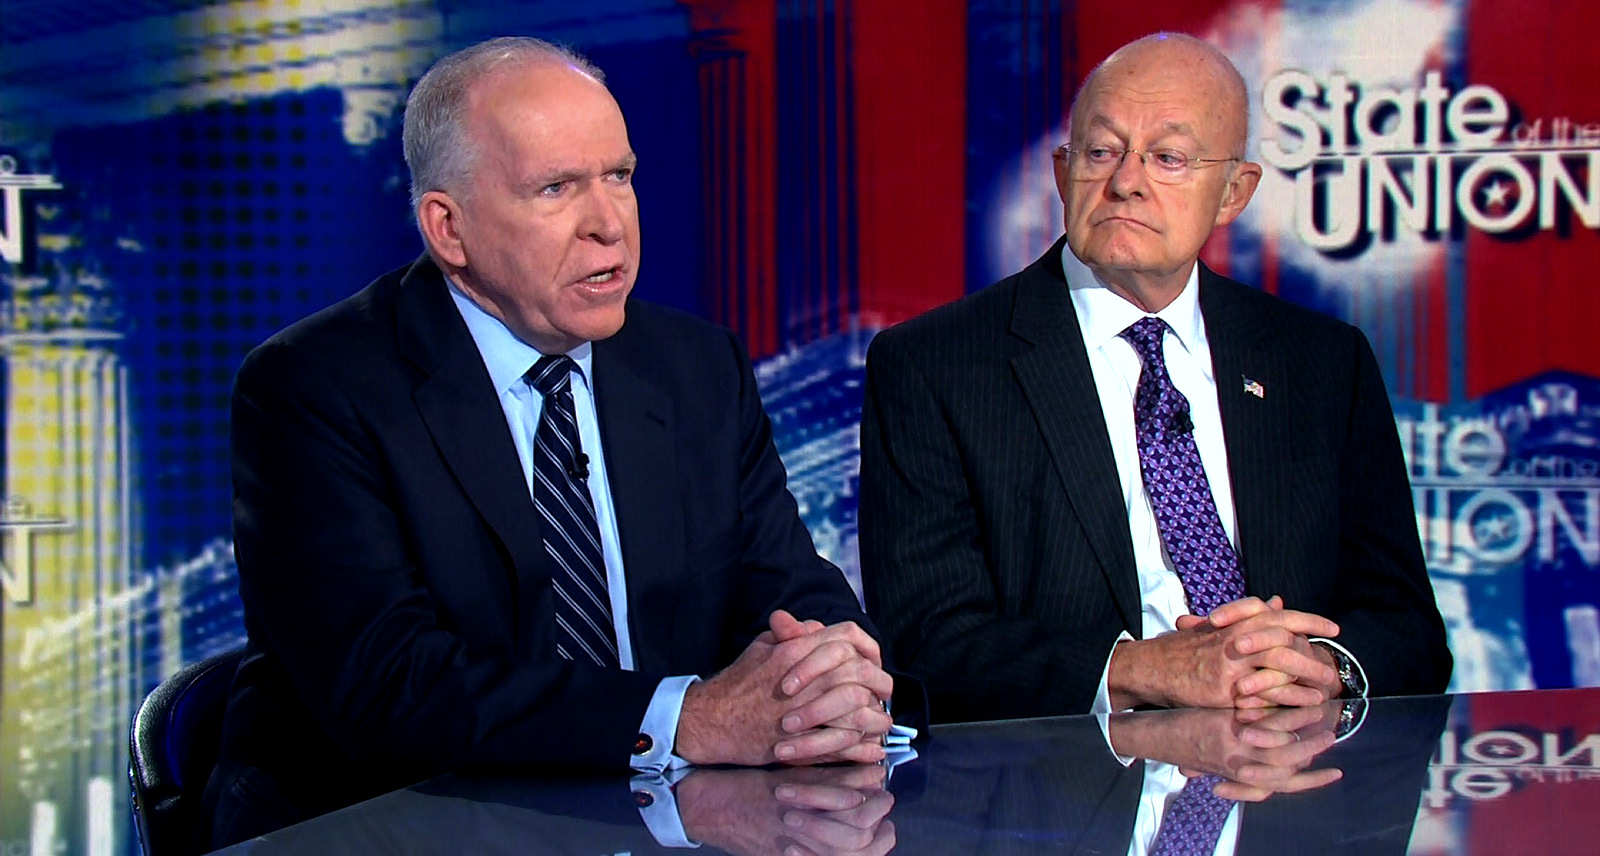 Former Director of National Intelligence James Clapper and former CIA Director John Brennan appear on CNN to discuss allegations of Russian influence in the presidential elections. (CNN Screenshot)